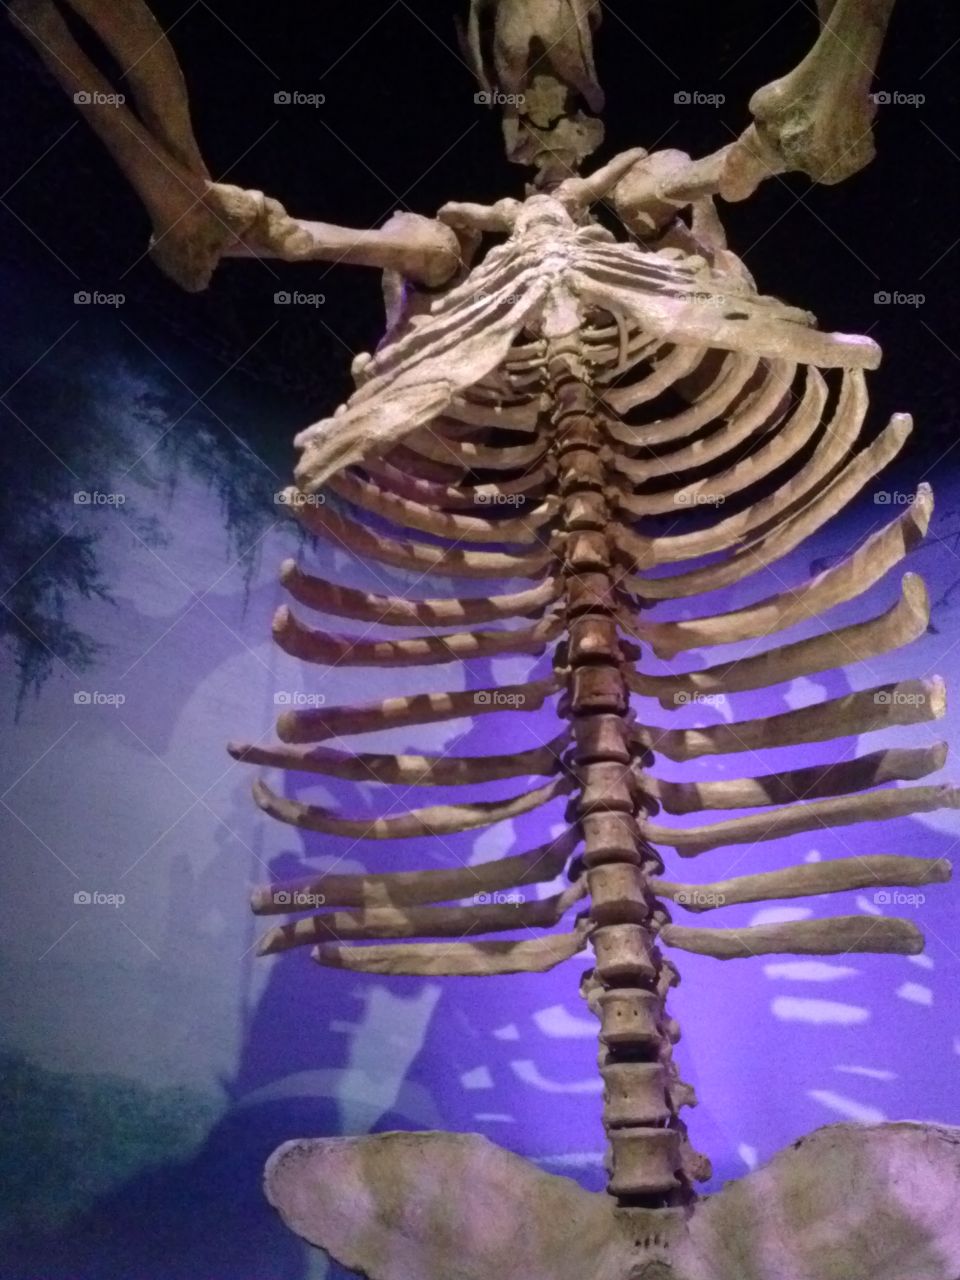 Giant Sloth. On display at the Florida Museum of Natural History.